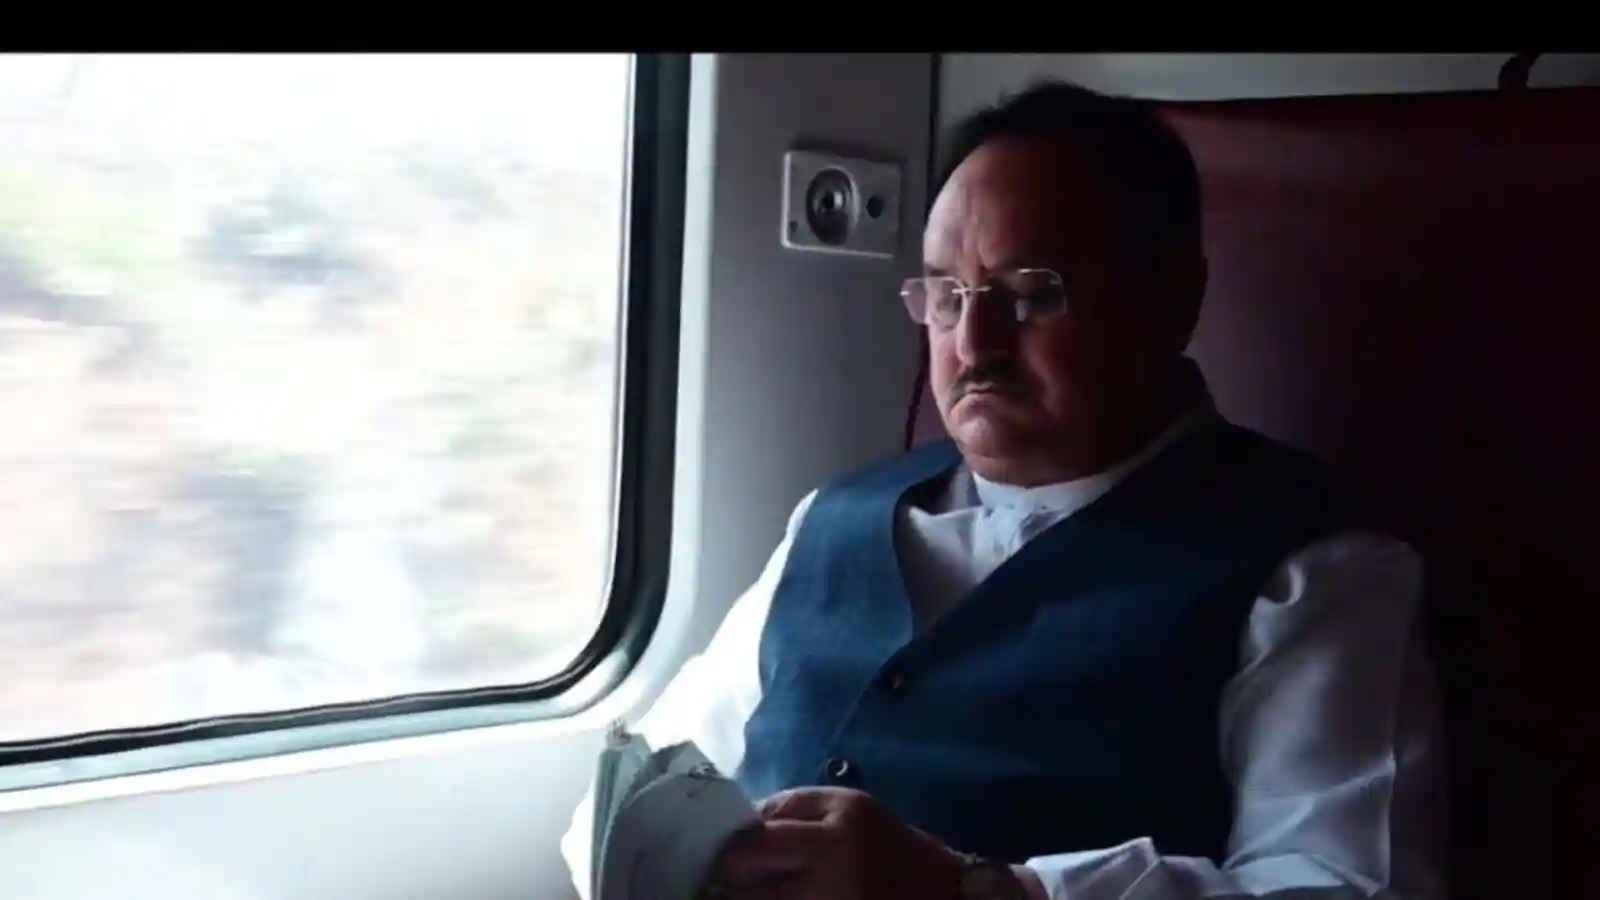 BJP President JP Nadda travels with Indian Railways, shares his experience